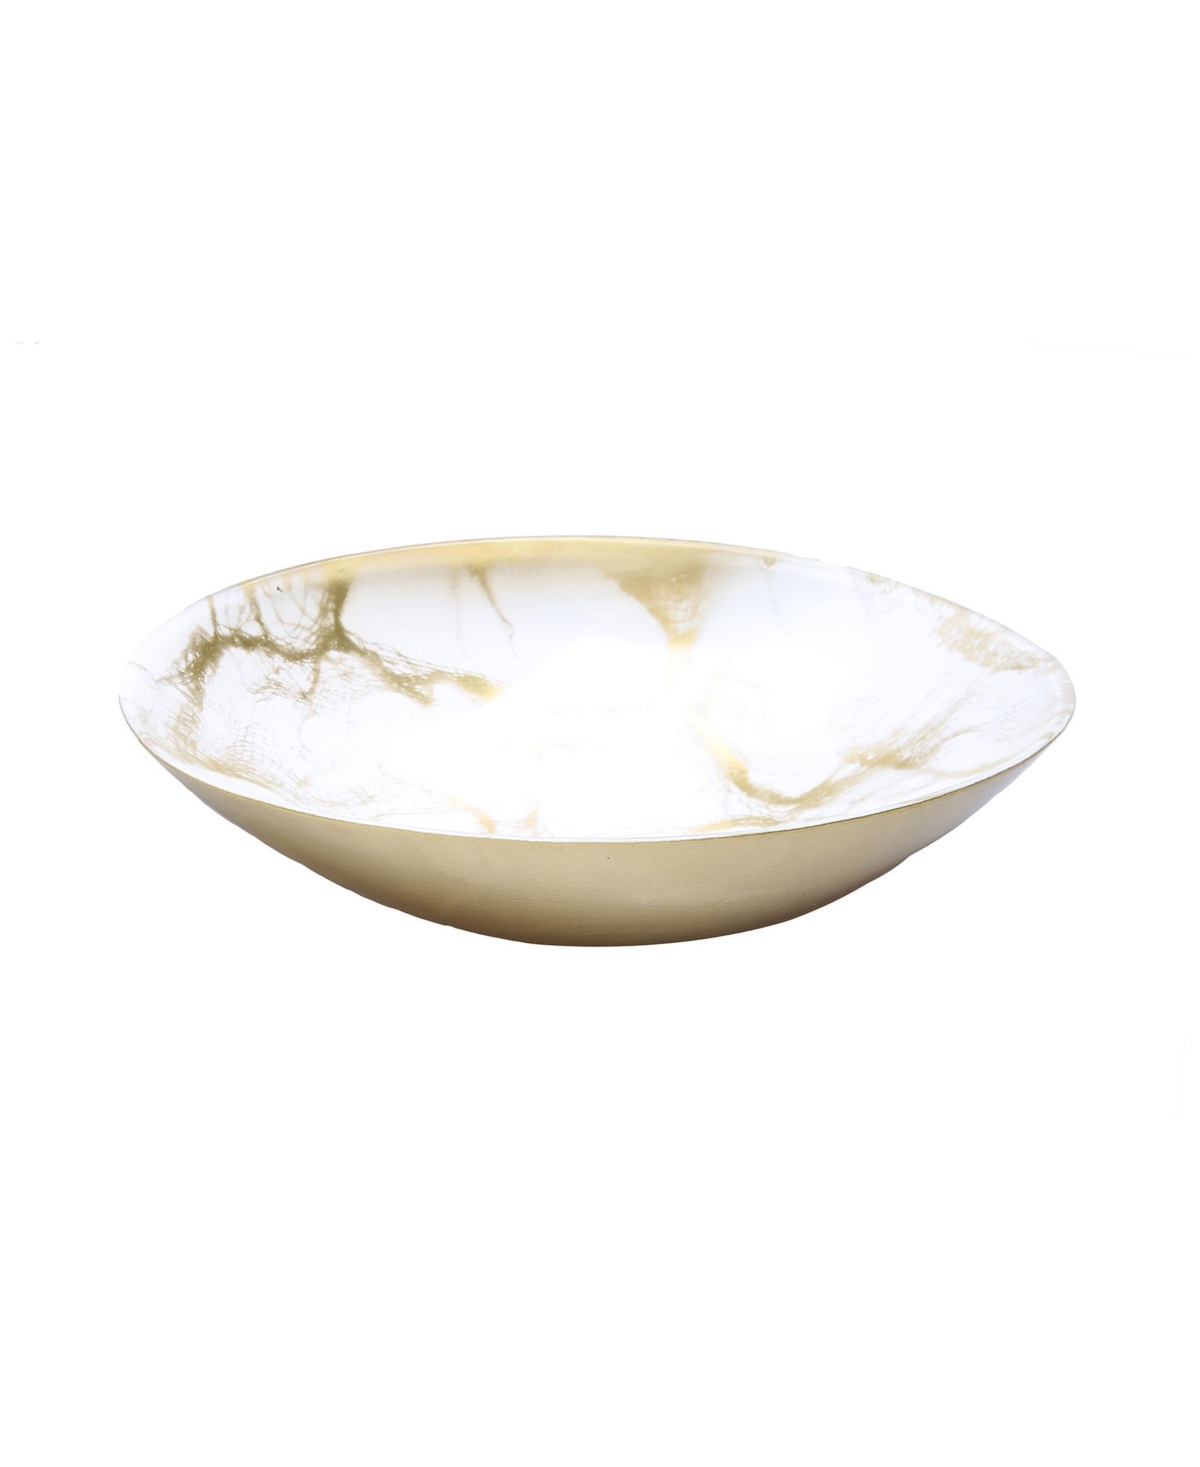 Marbleized Oval Bowls, Set of 4 - Gold - Tone